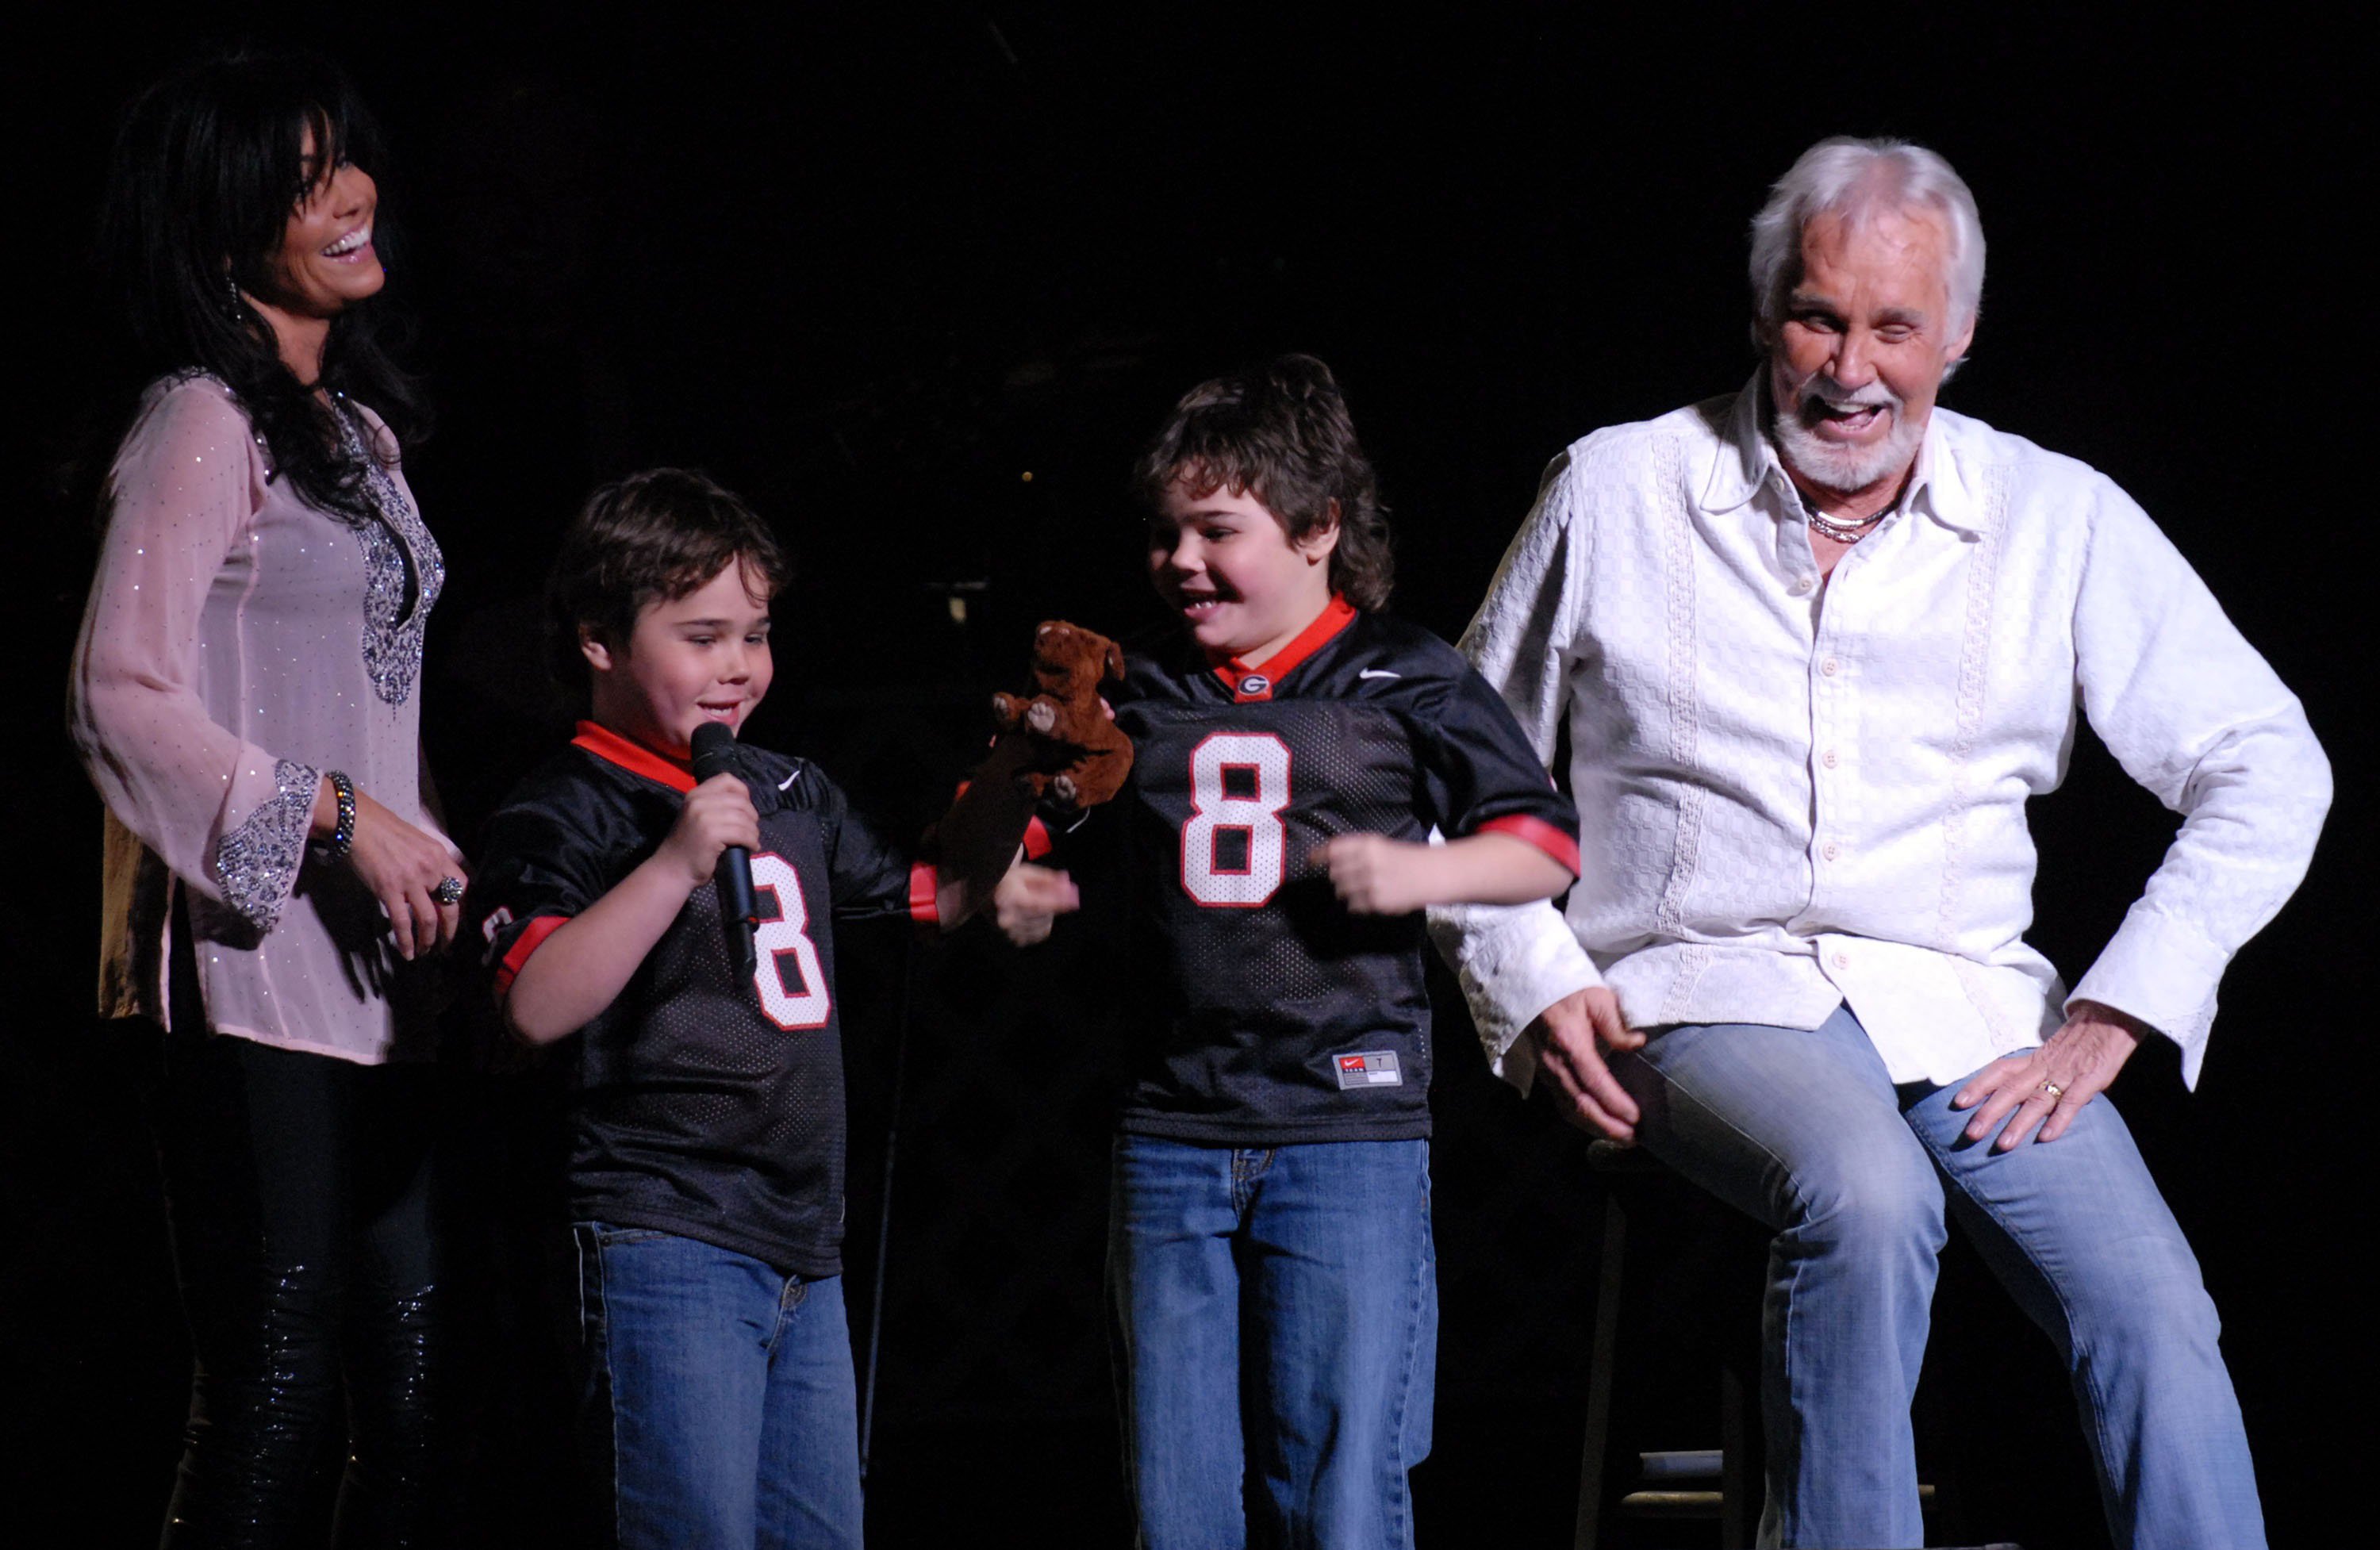 Kenny Rogers is joined onstage by his wife Wanda Rogers and his sons Justin Rogers and Jordan Rogers at the Classic Center on February 12, 2011 in Athens, Georgia. | Source: Getty Images